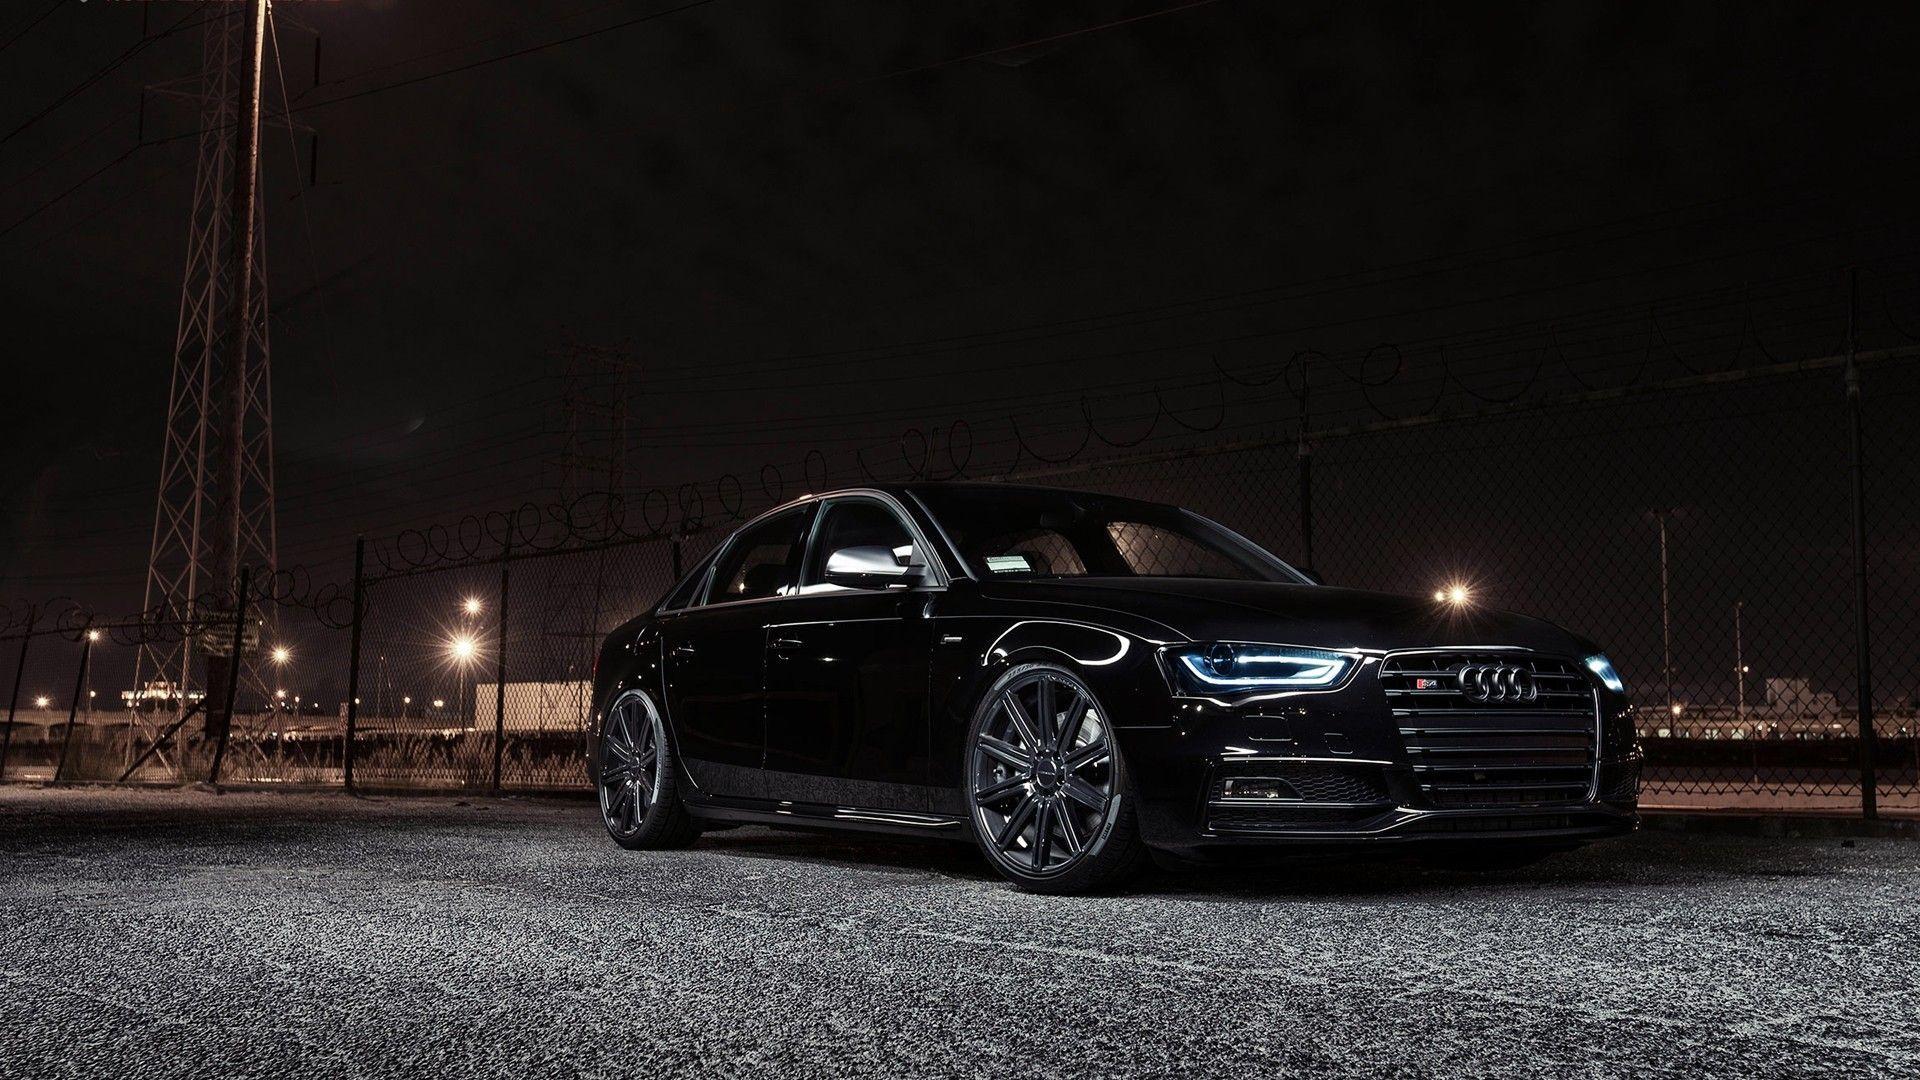 Best Audi Wallpaper in High Quality, Audi Background